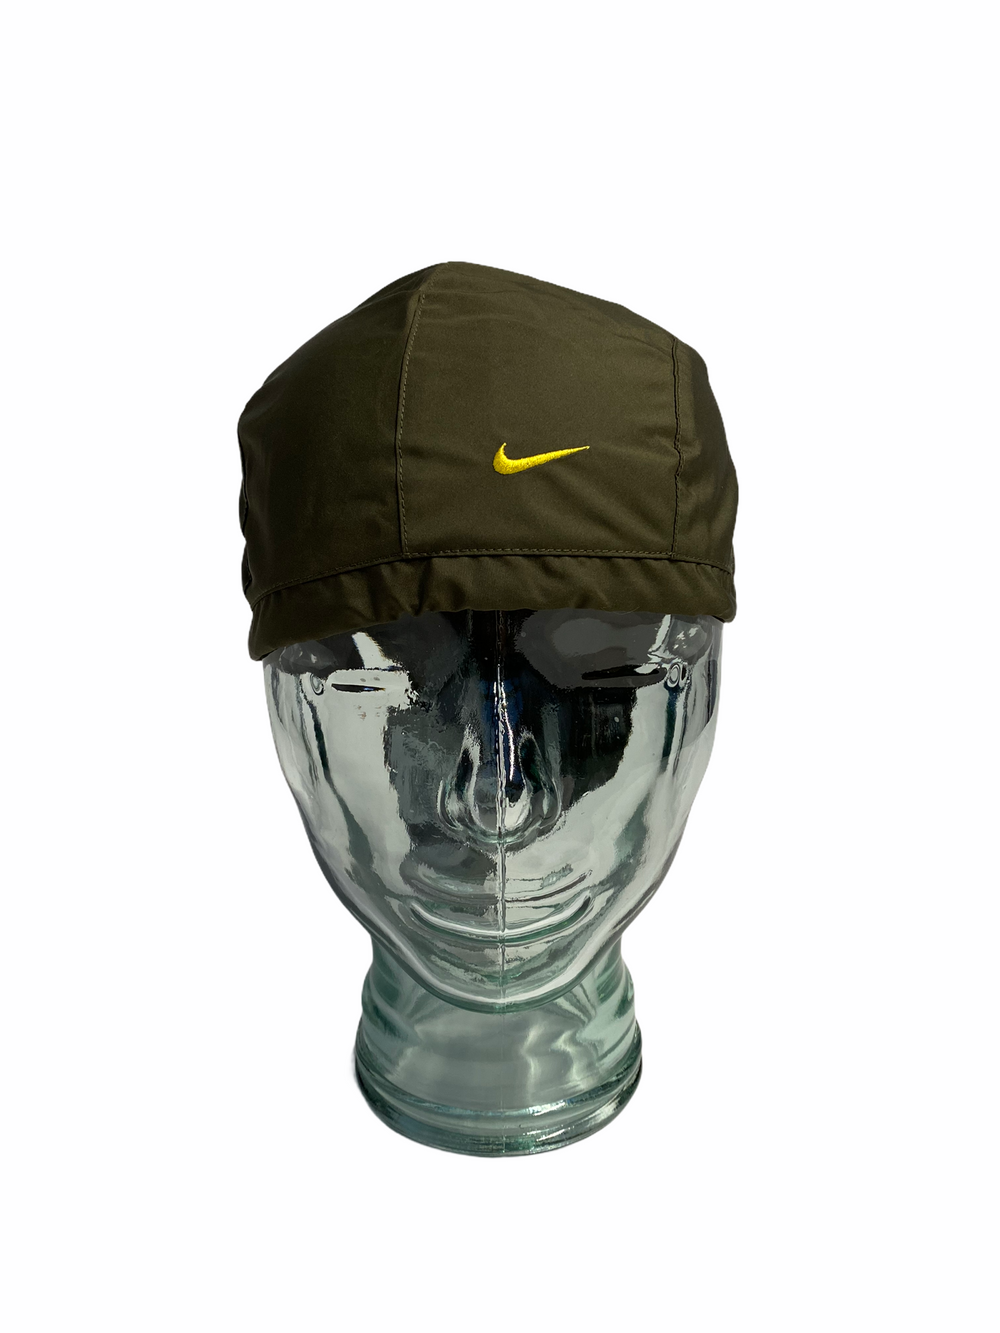 Nike Soft Shell Cap / Durag  in Green with Yellow Swoosh - Not In Your Wardrobe™ - [Vendor]